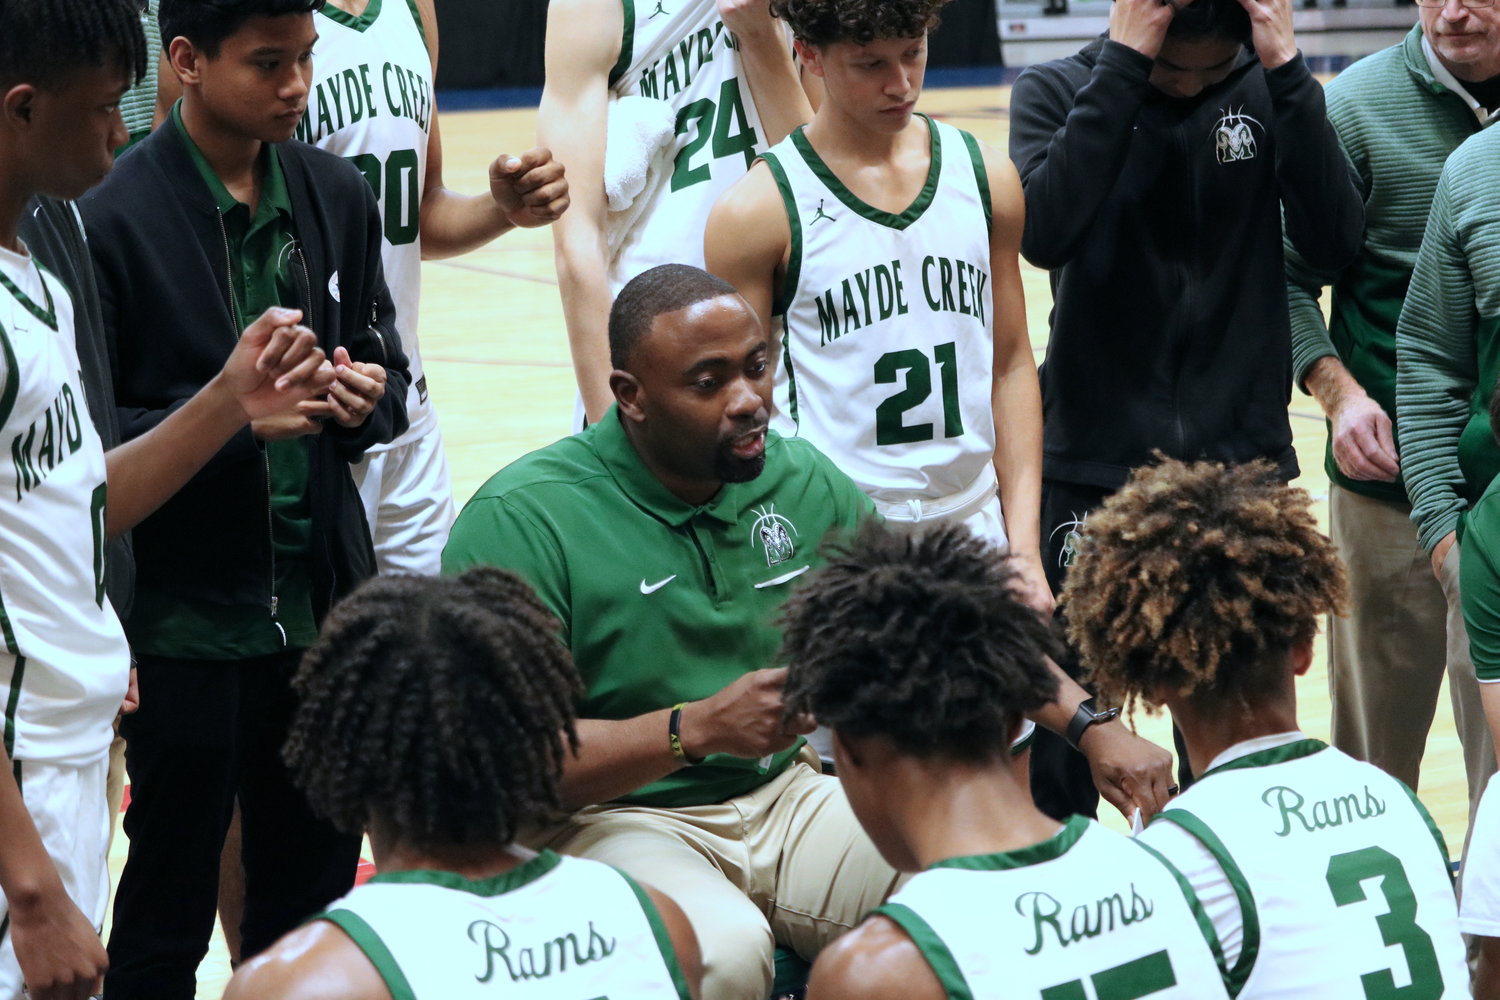 Mayde Creek head coach Anthony Fobb talks to his team during a timeout during Tuesday’s Class 6A regional quarterfinal between Mayde Creek and Fort Bend Clements at the Merrell Center.